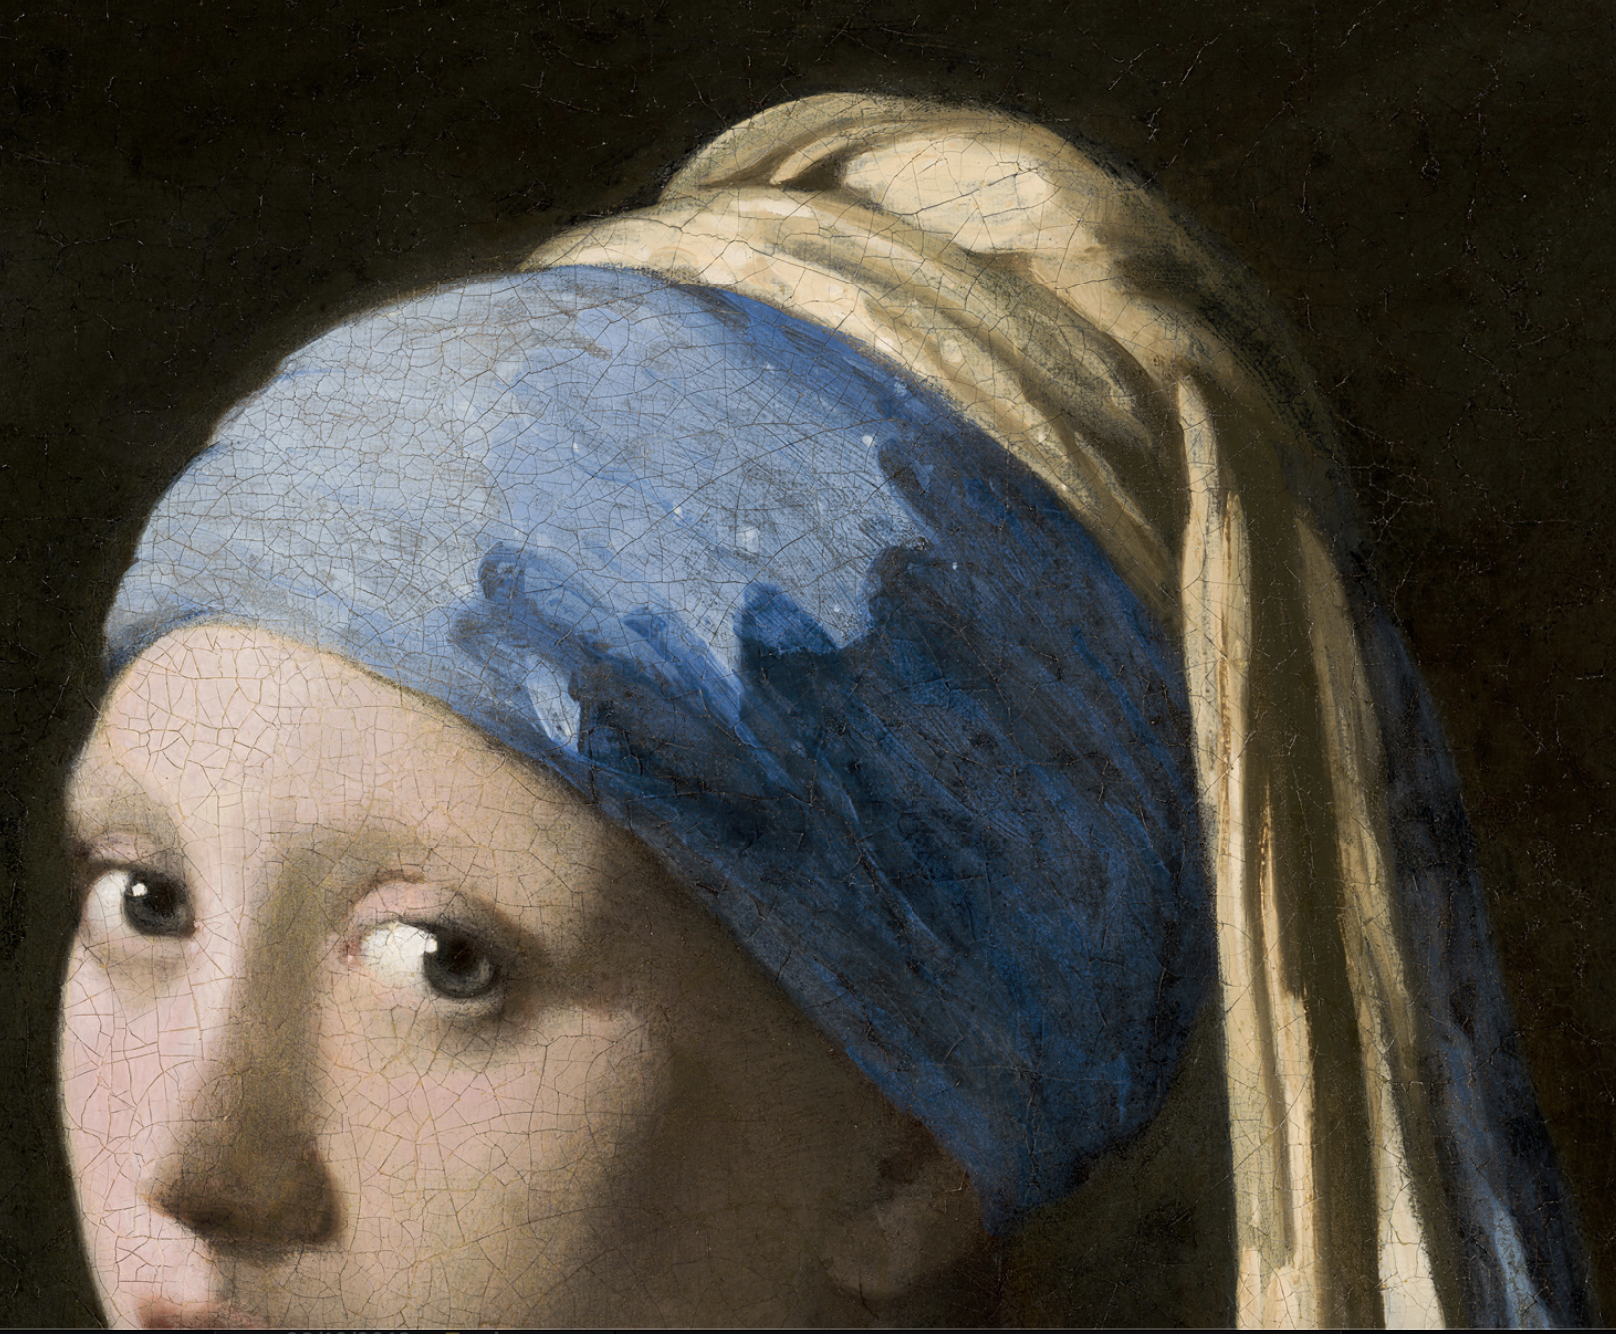 Johannes Vermeer, Girl With a Pearl Earring, c. 1665, Mauritshuis, The Hague, The Netherlands. Wikimedia Commons (public domain).